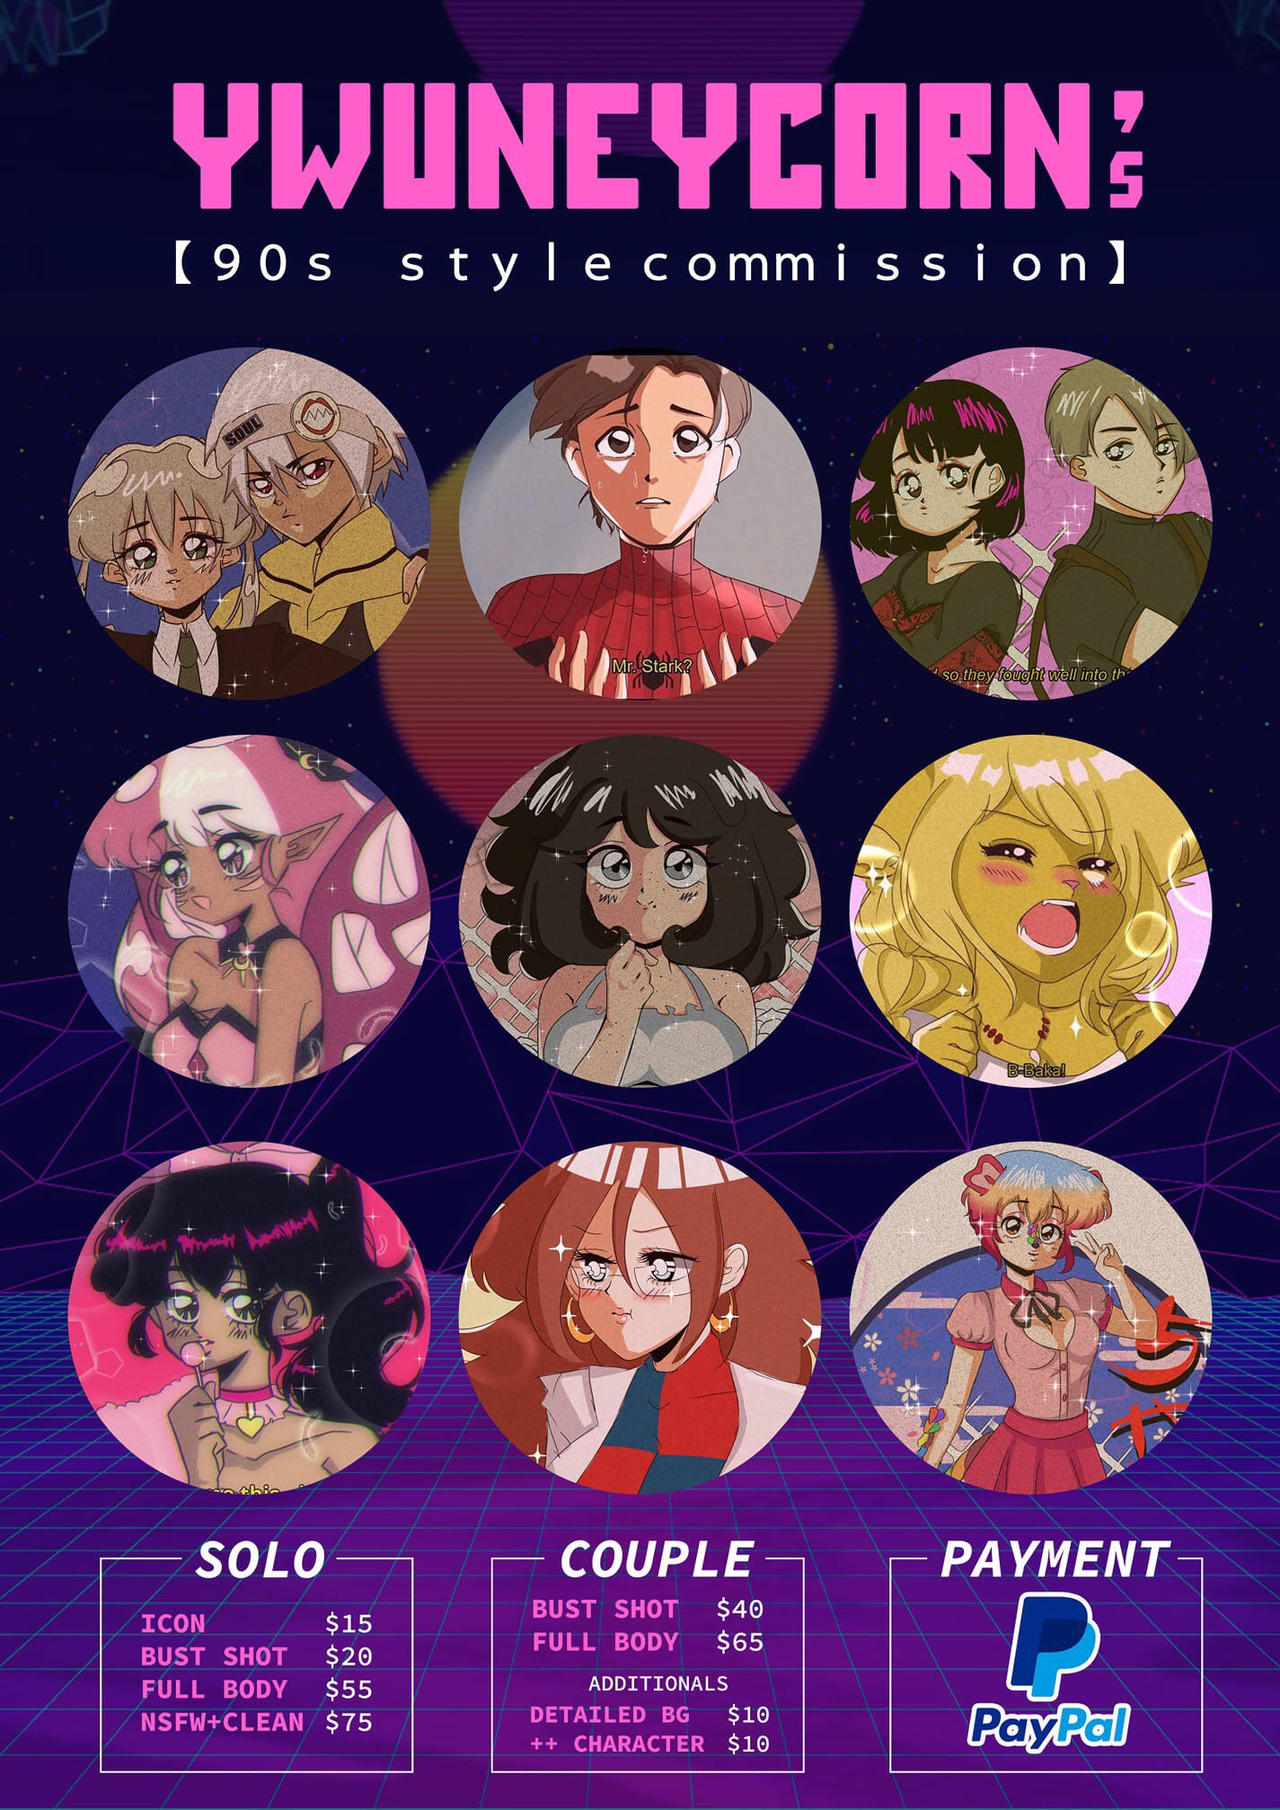 90s anime style by ywuneycorn on DeviantArt